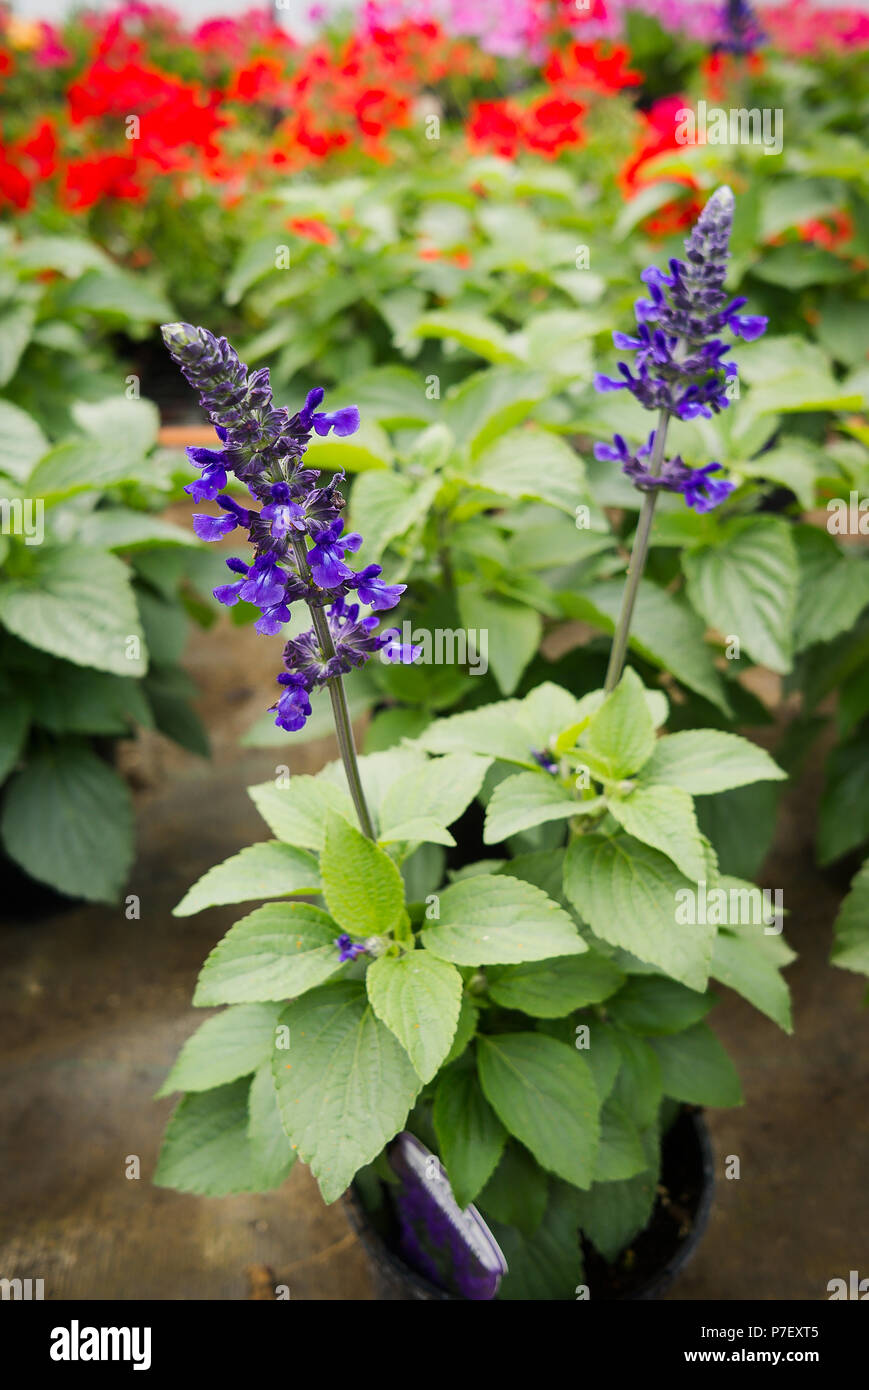 Salvia Mystic Spires in an English plant nursery in May Stock Photo